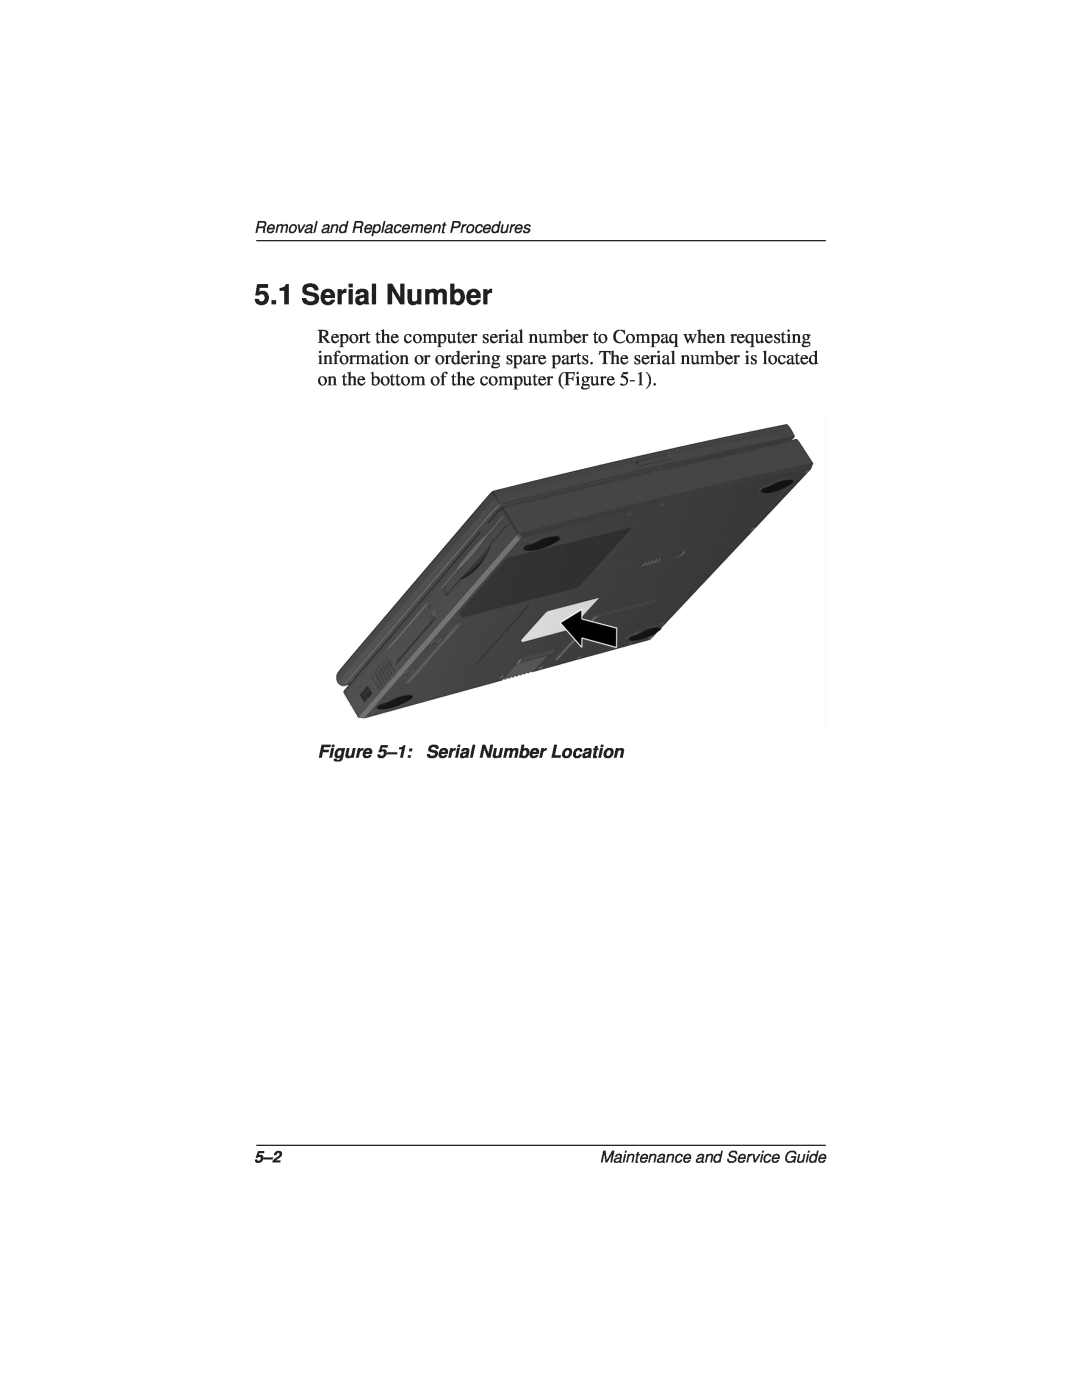 Compaq N110 manual 1 Serial Number Location, Removal and Replacement Procedures, Maintenance and Service Guide 